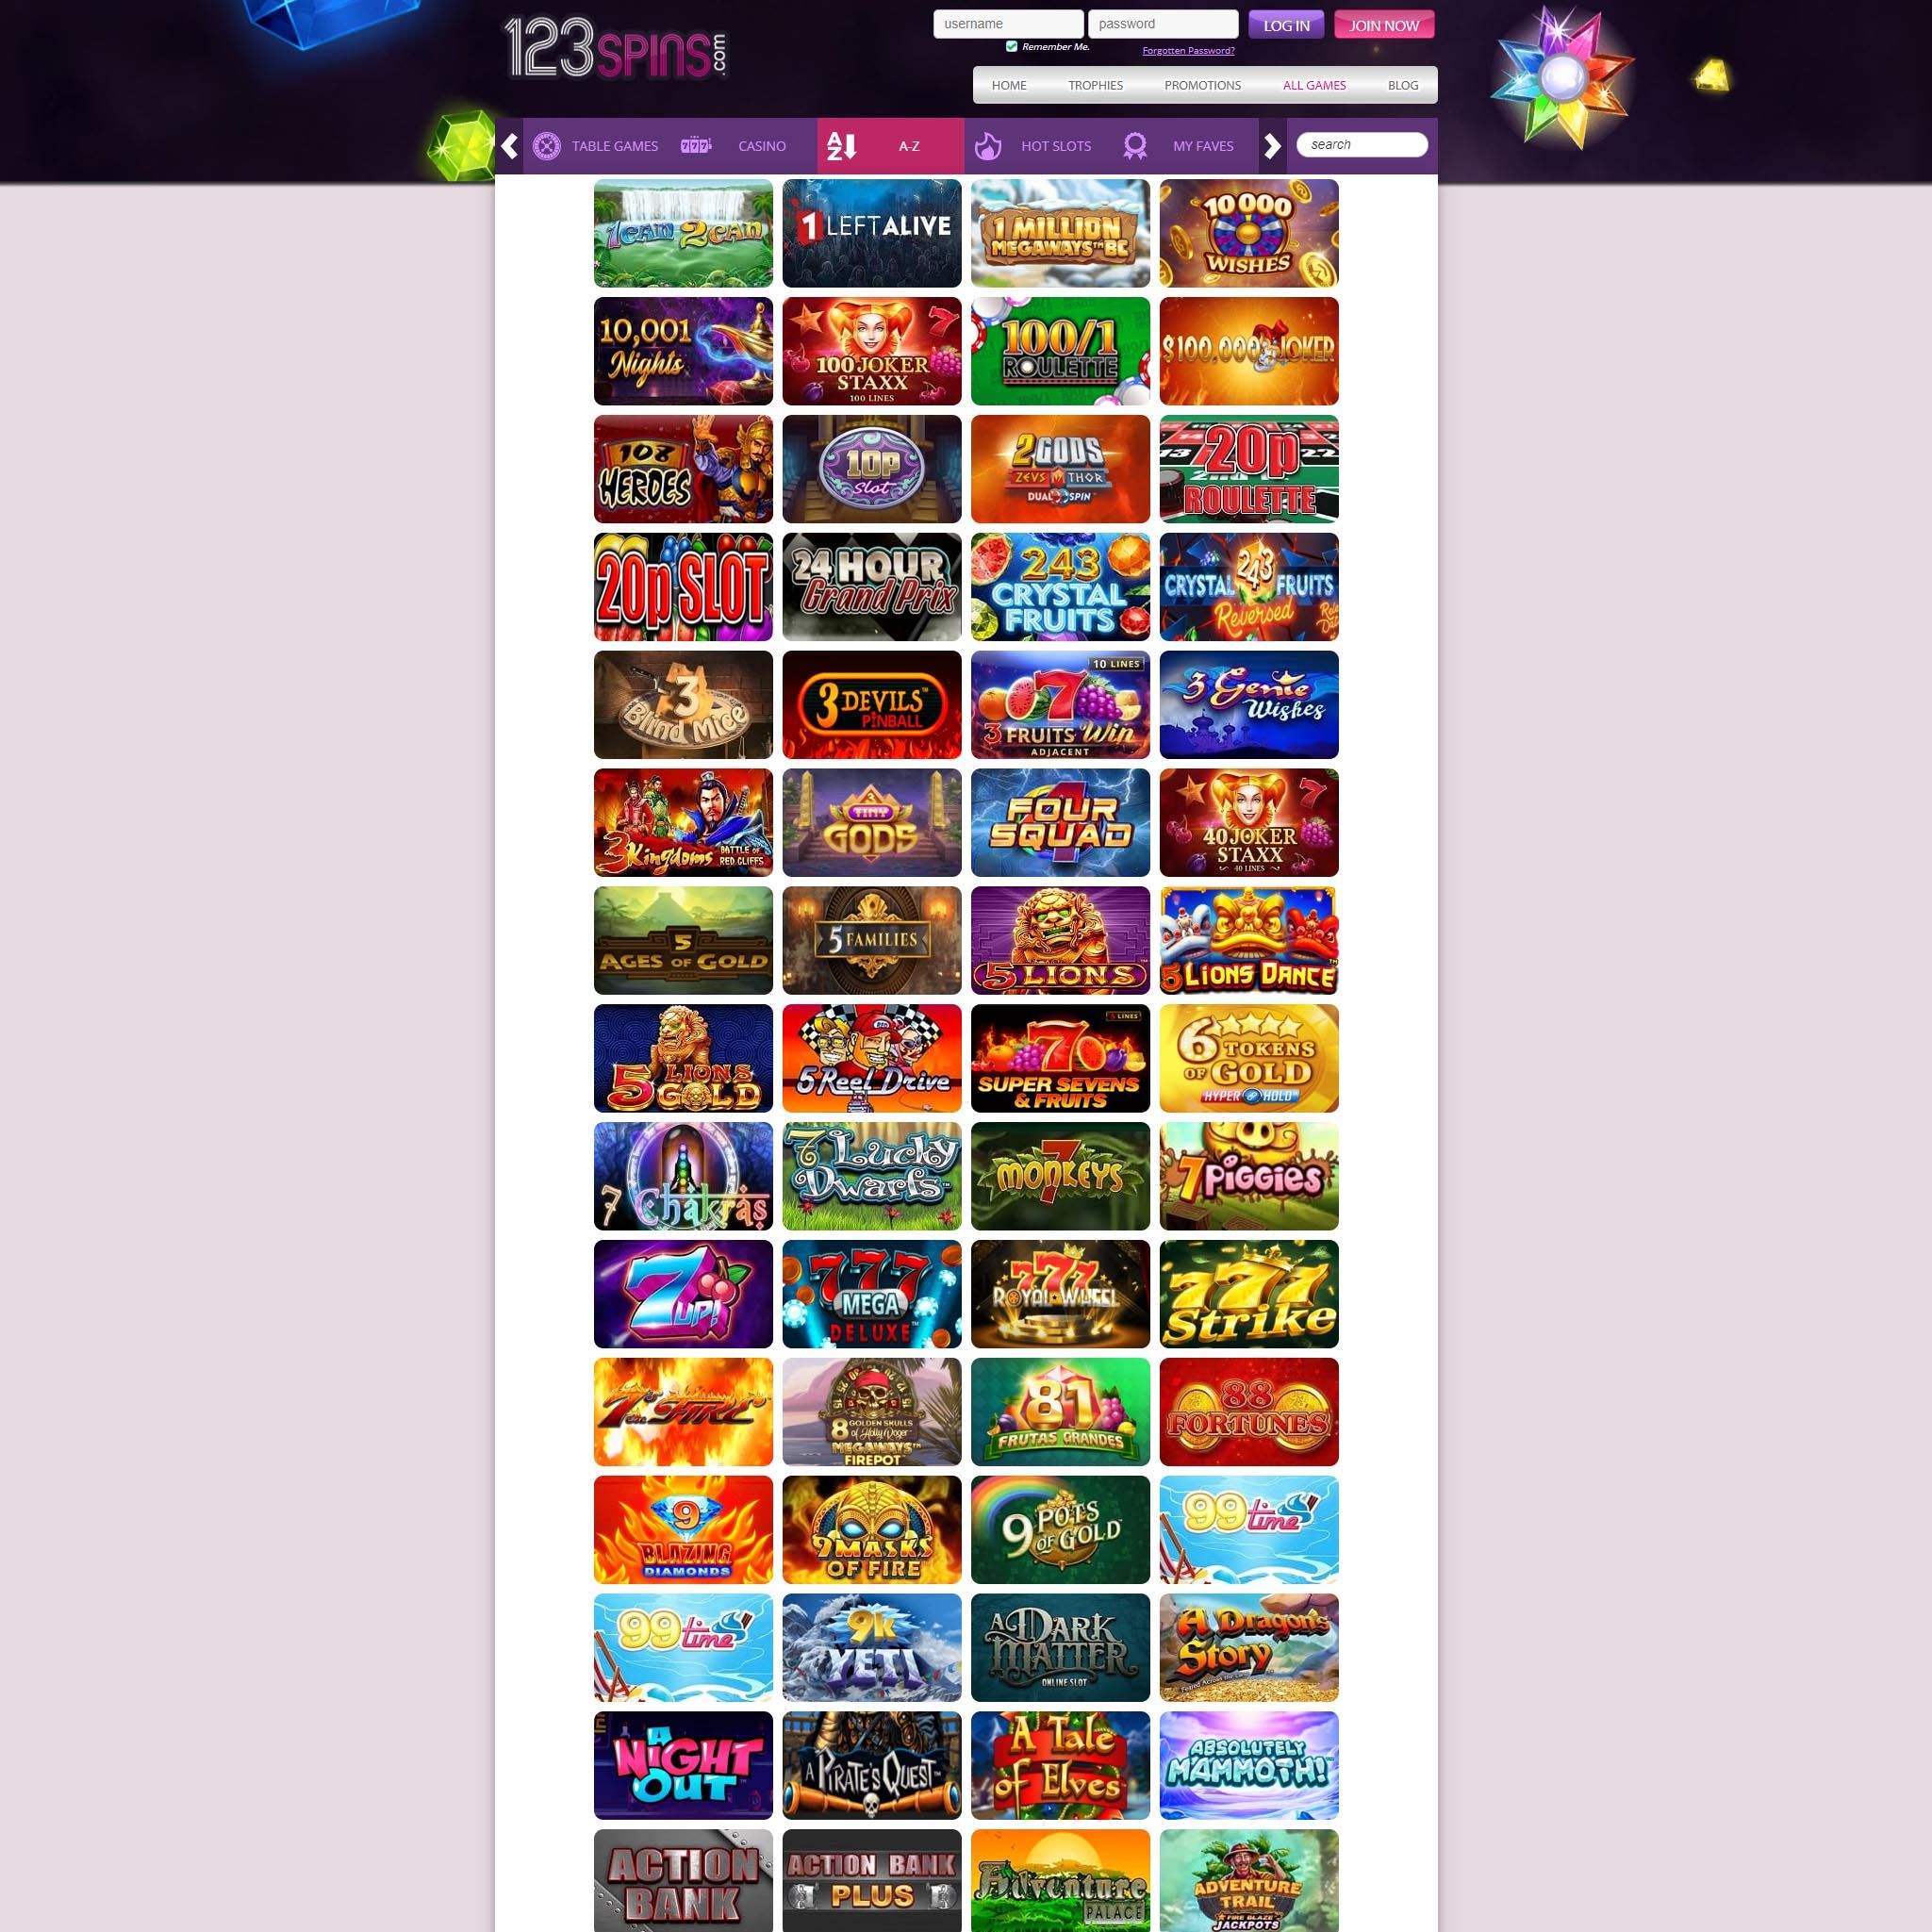 123spins Casino review by Mr. Gamble